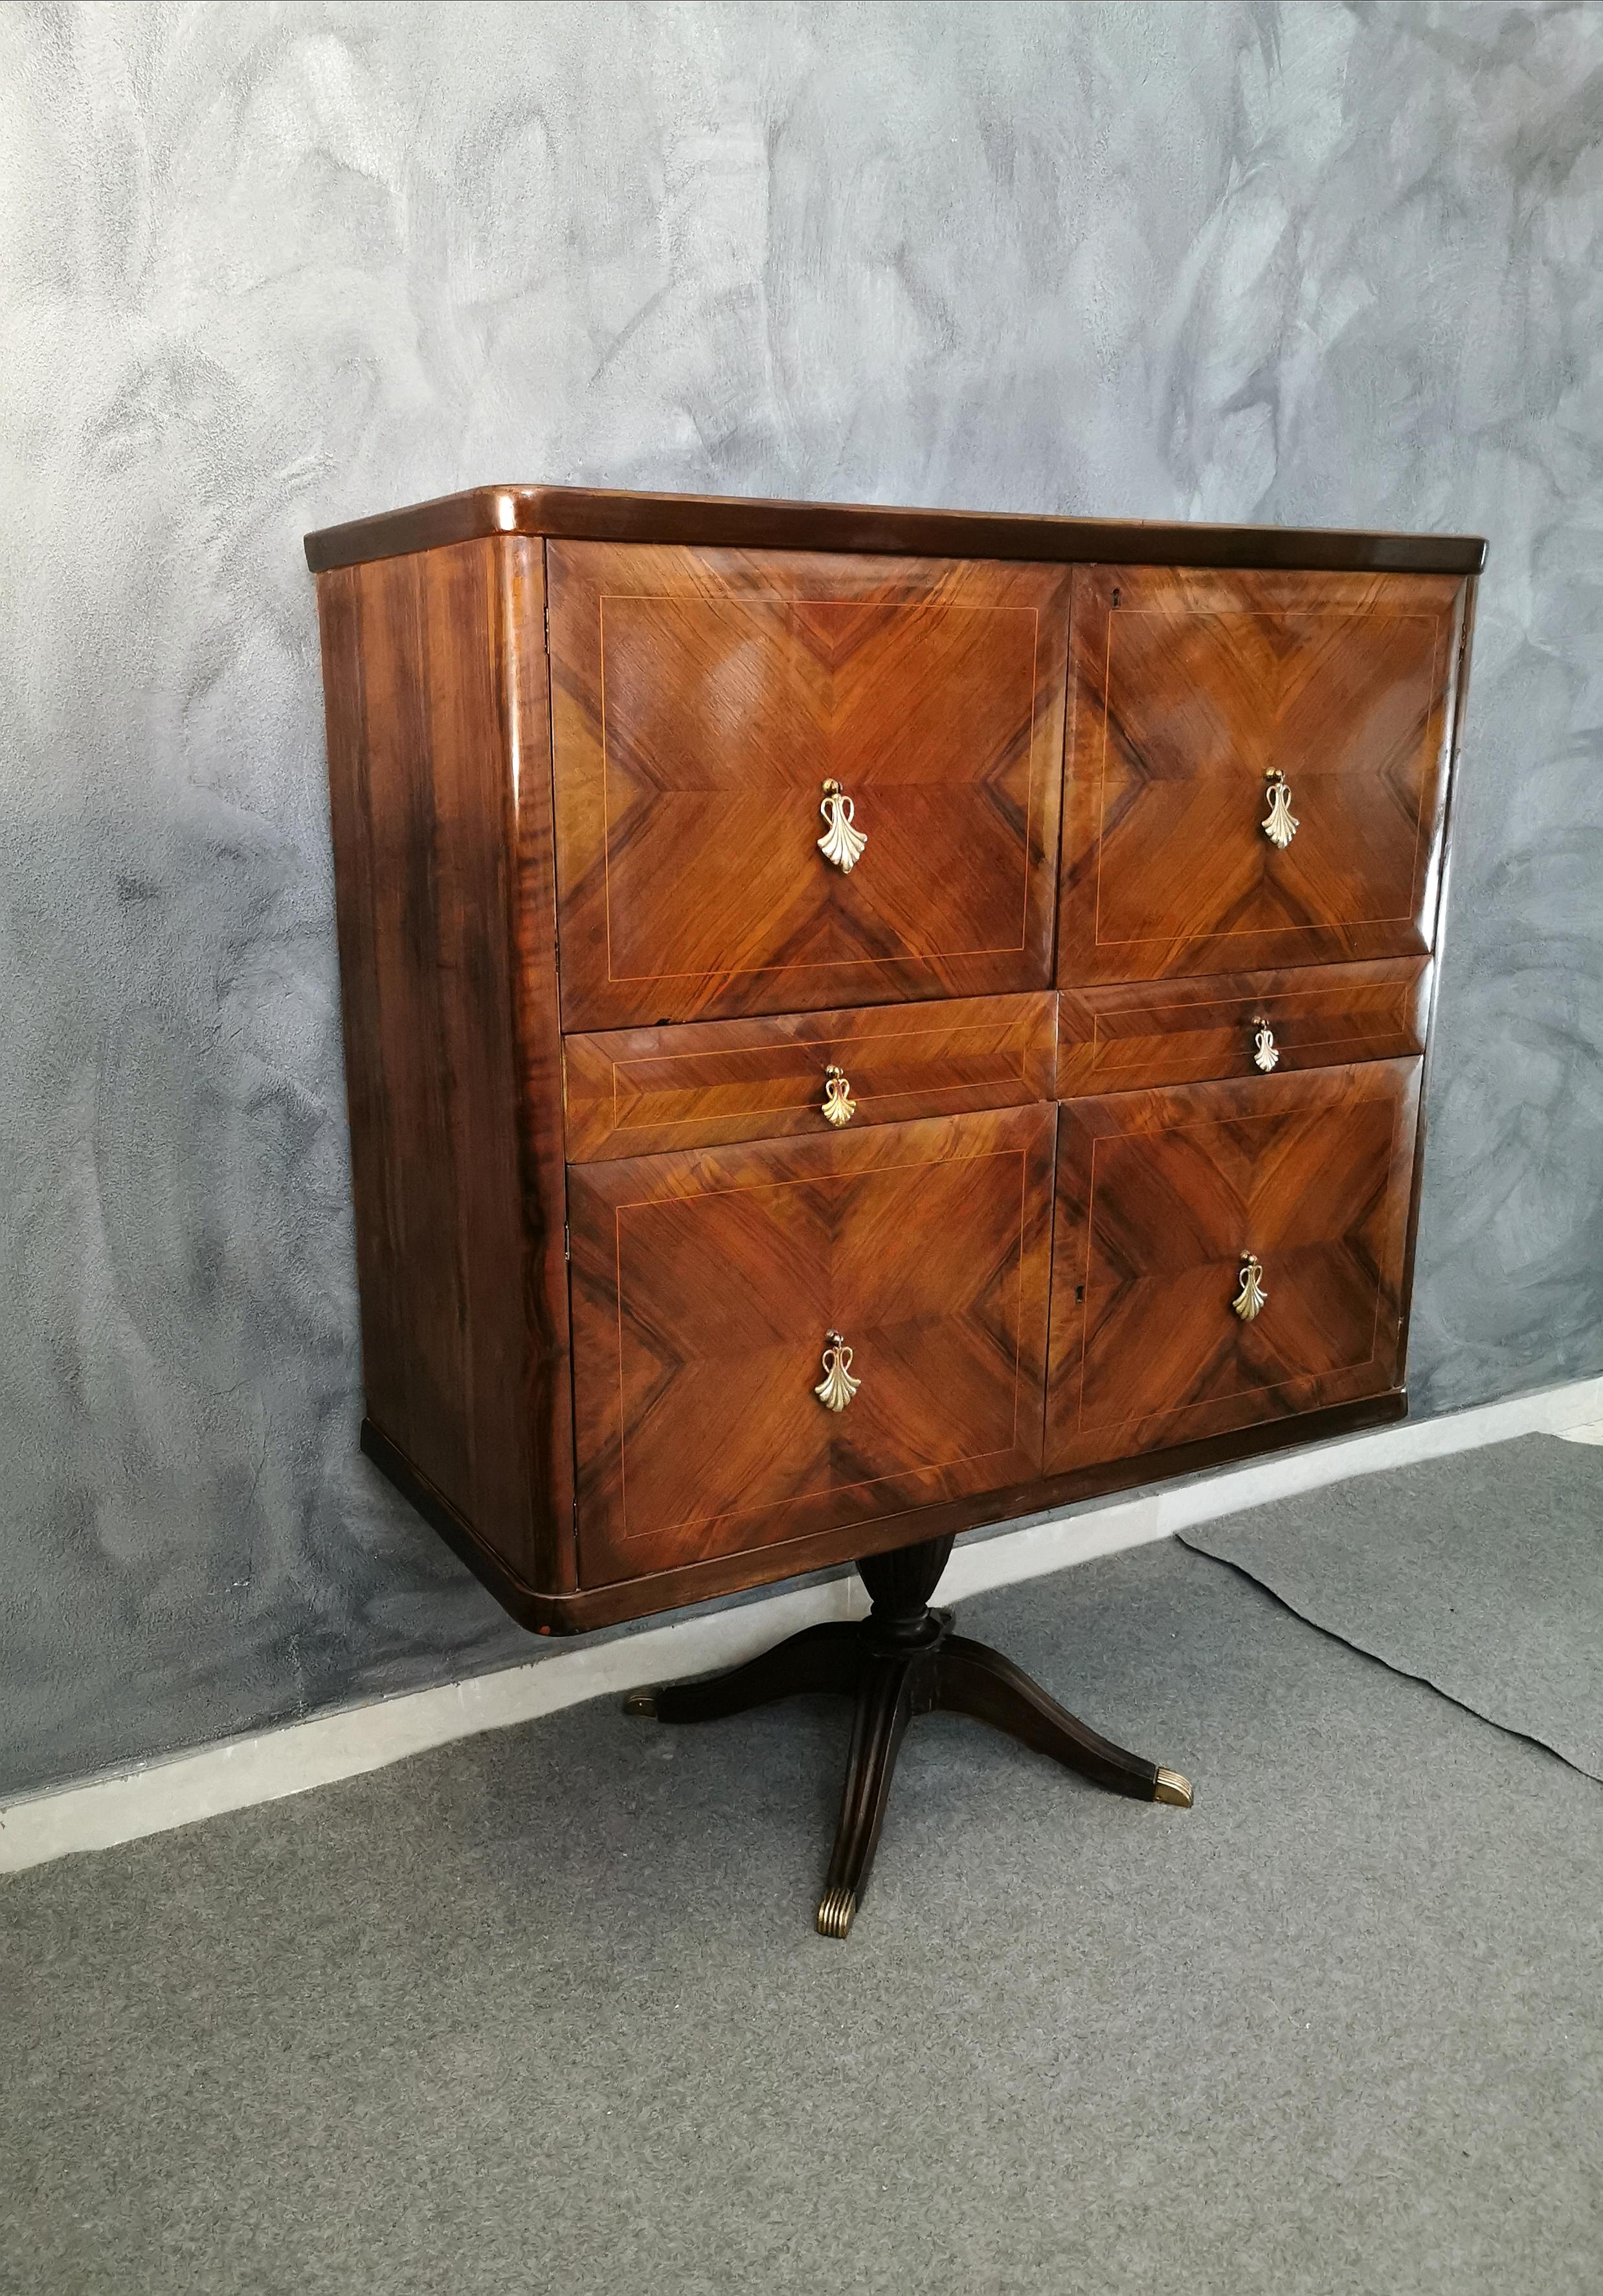 Exceptional bar cabinet by designer and architect Paolo Buffa, the furniture is rosewood veneer with a herringbone pattern and geometric designs. Supported by a central stem with 4 covered brass feet, on the front we have 2 drawers and 4 doors with